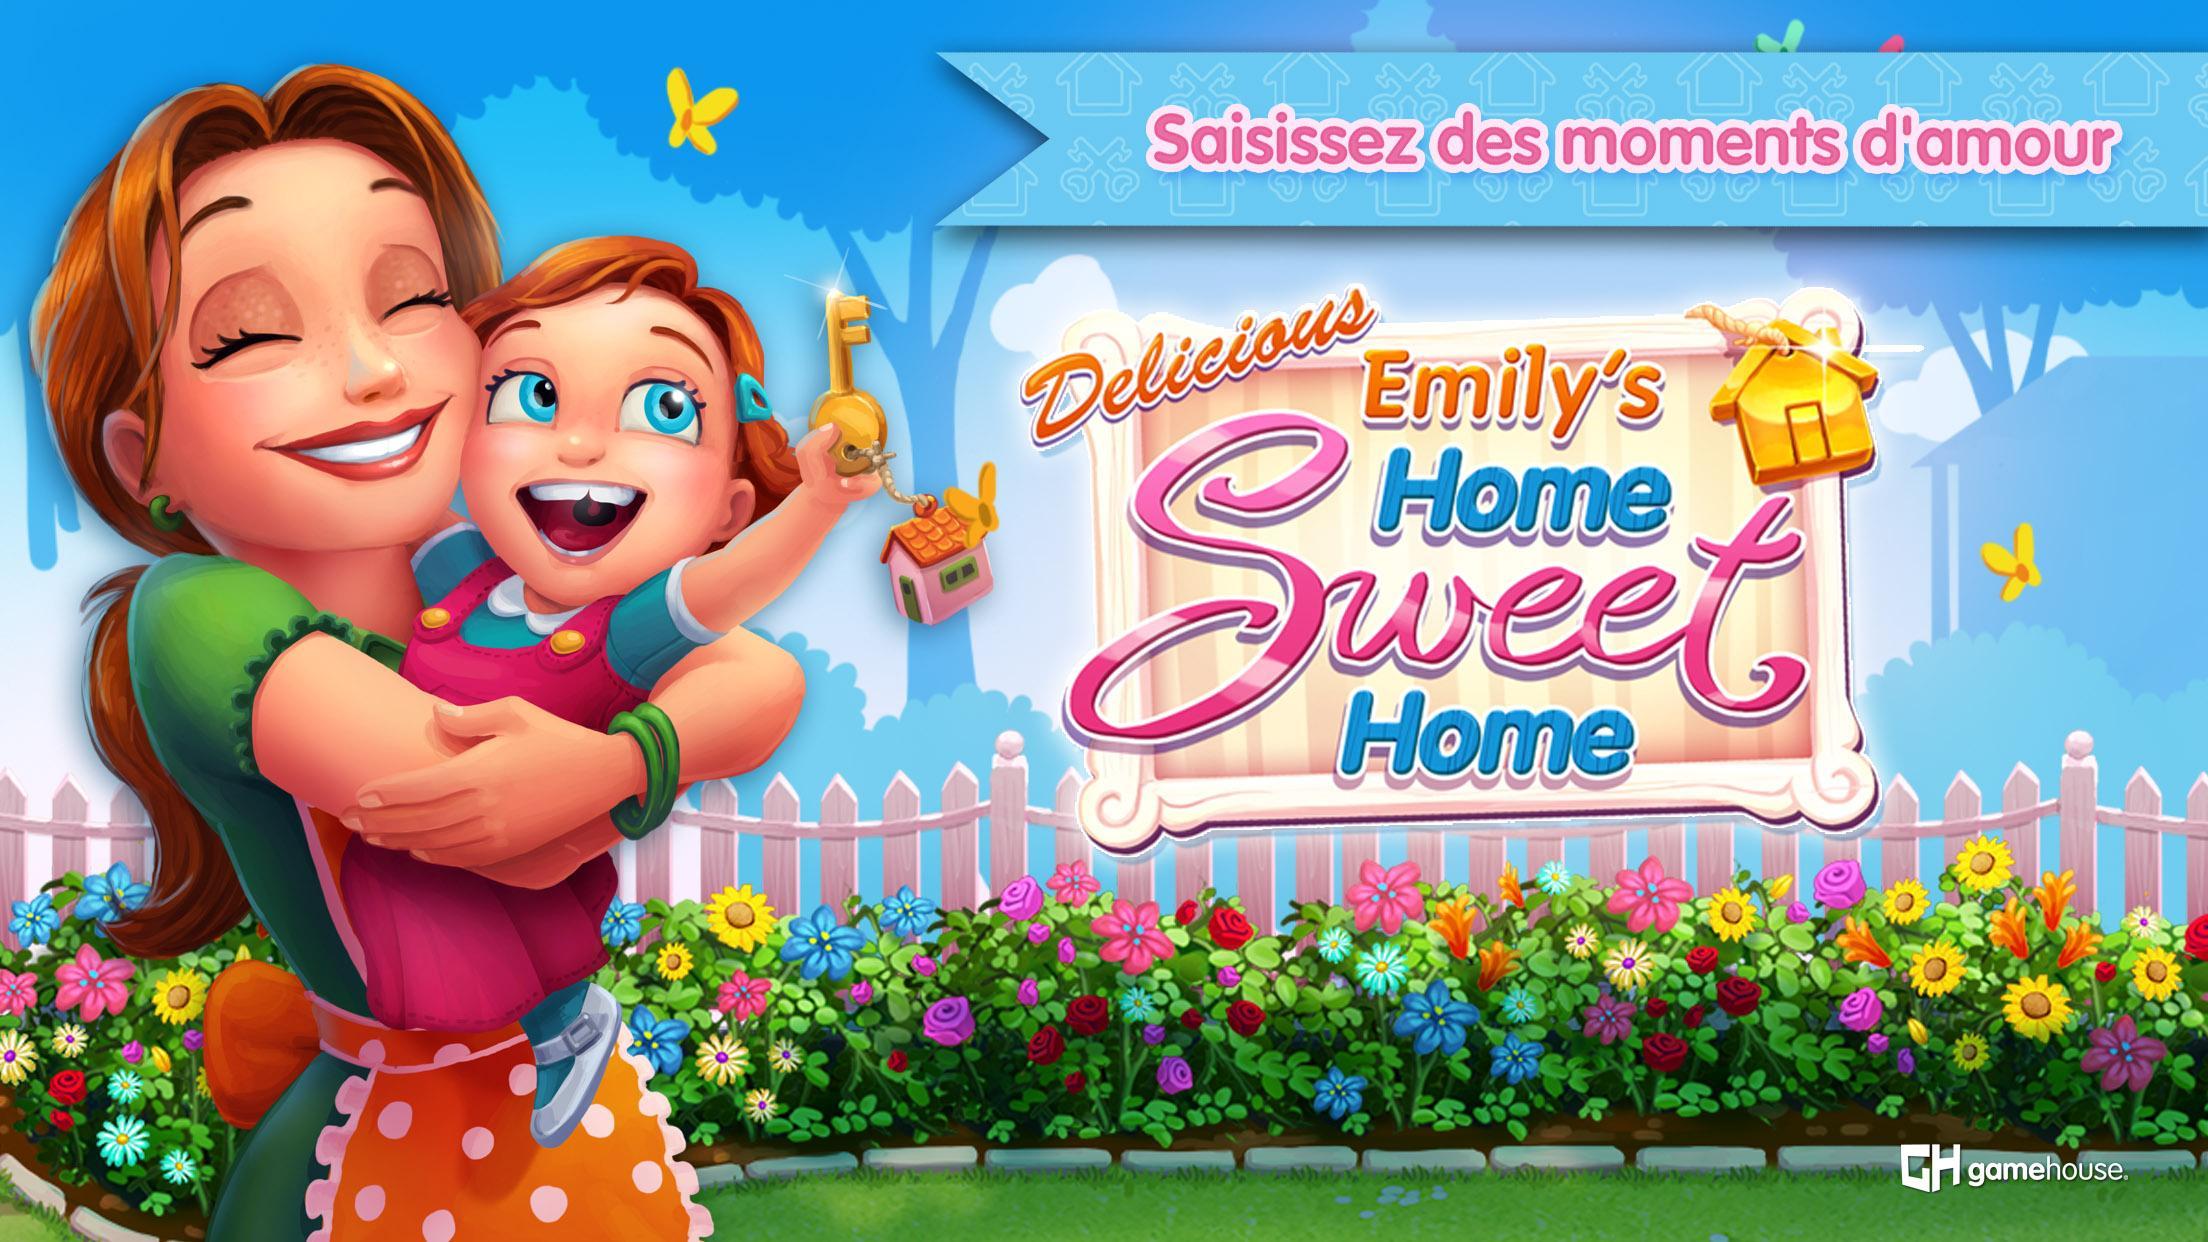 Screenshot 1 of Delicious - Home Sweet Home 59